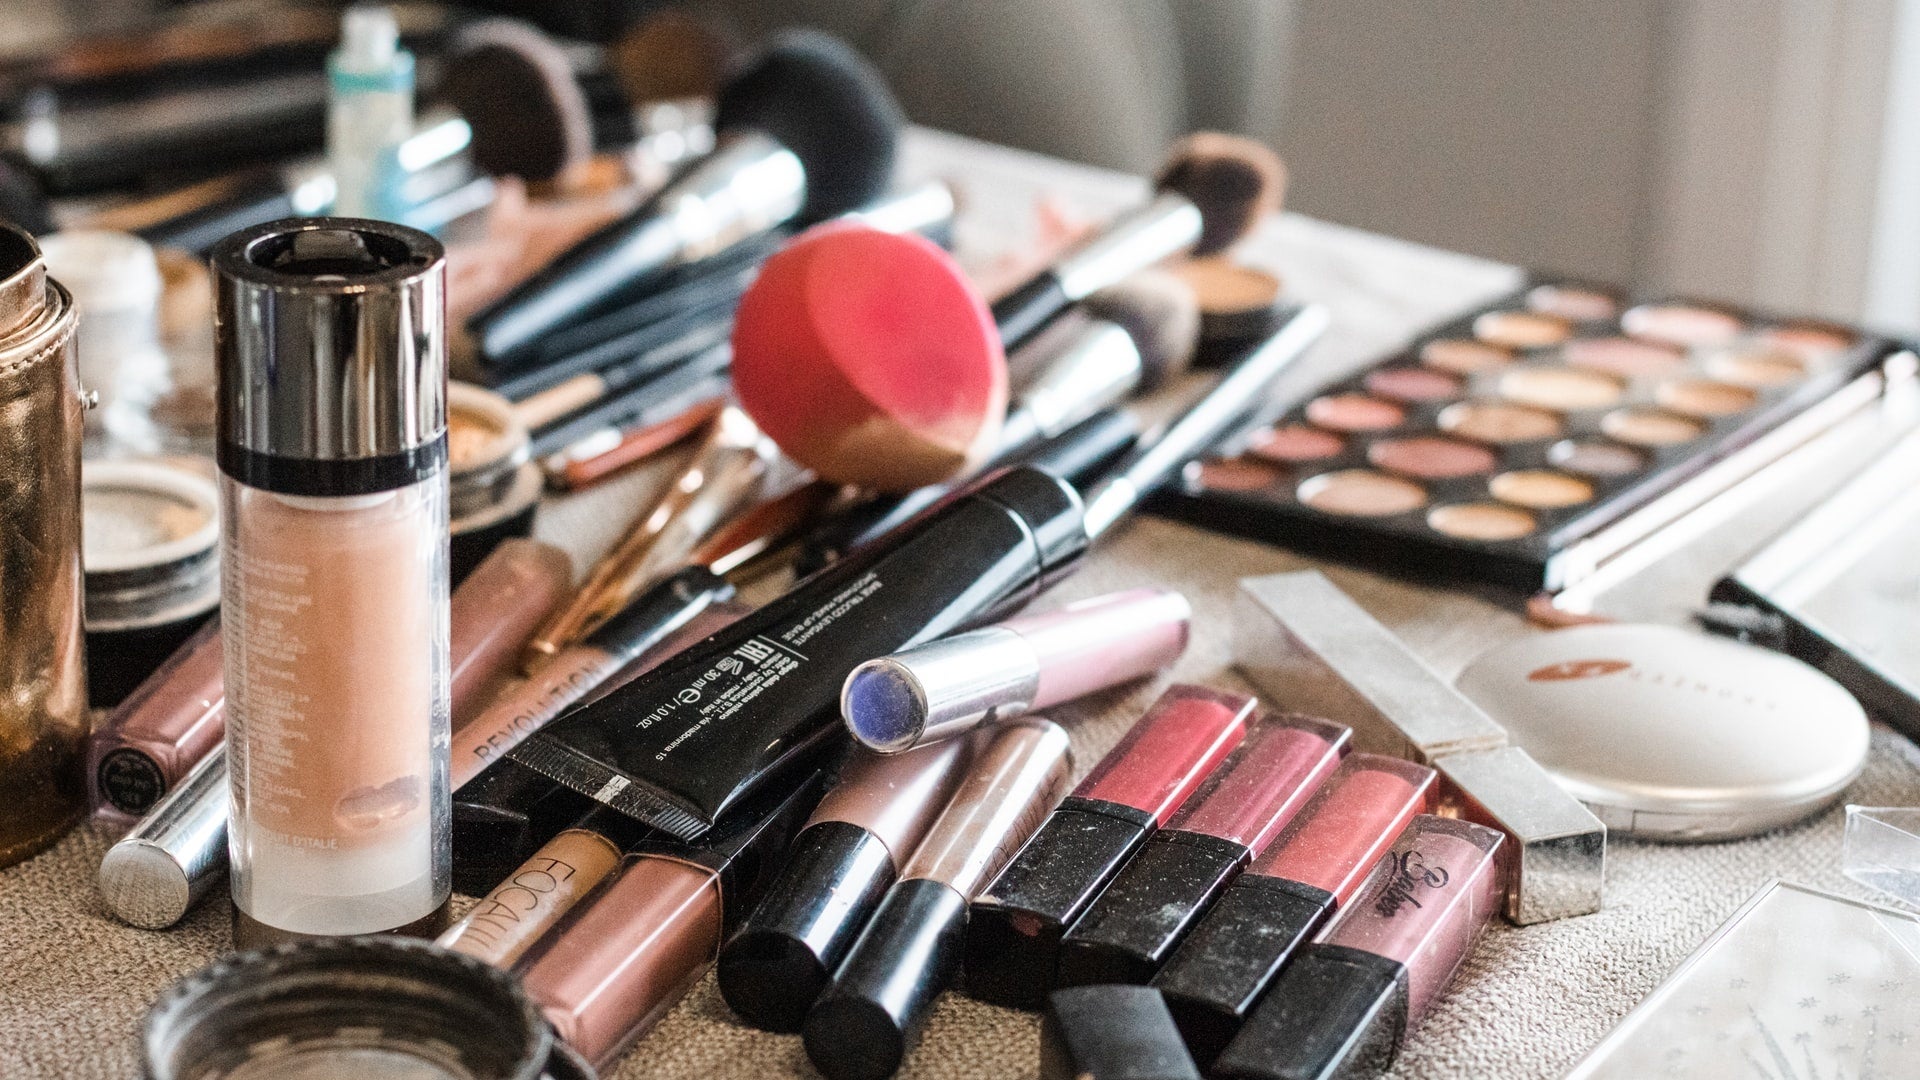 Get Organized! Expert Organizer Shares How To Clean The Clutter Off Your  Beauty Counter